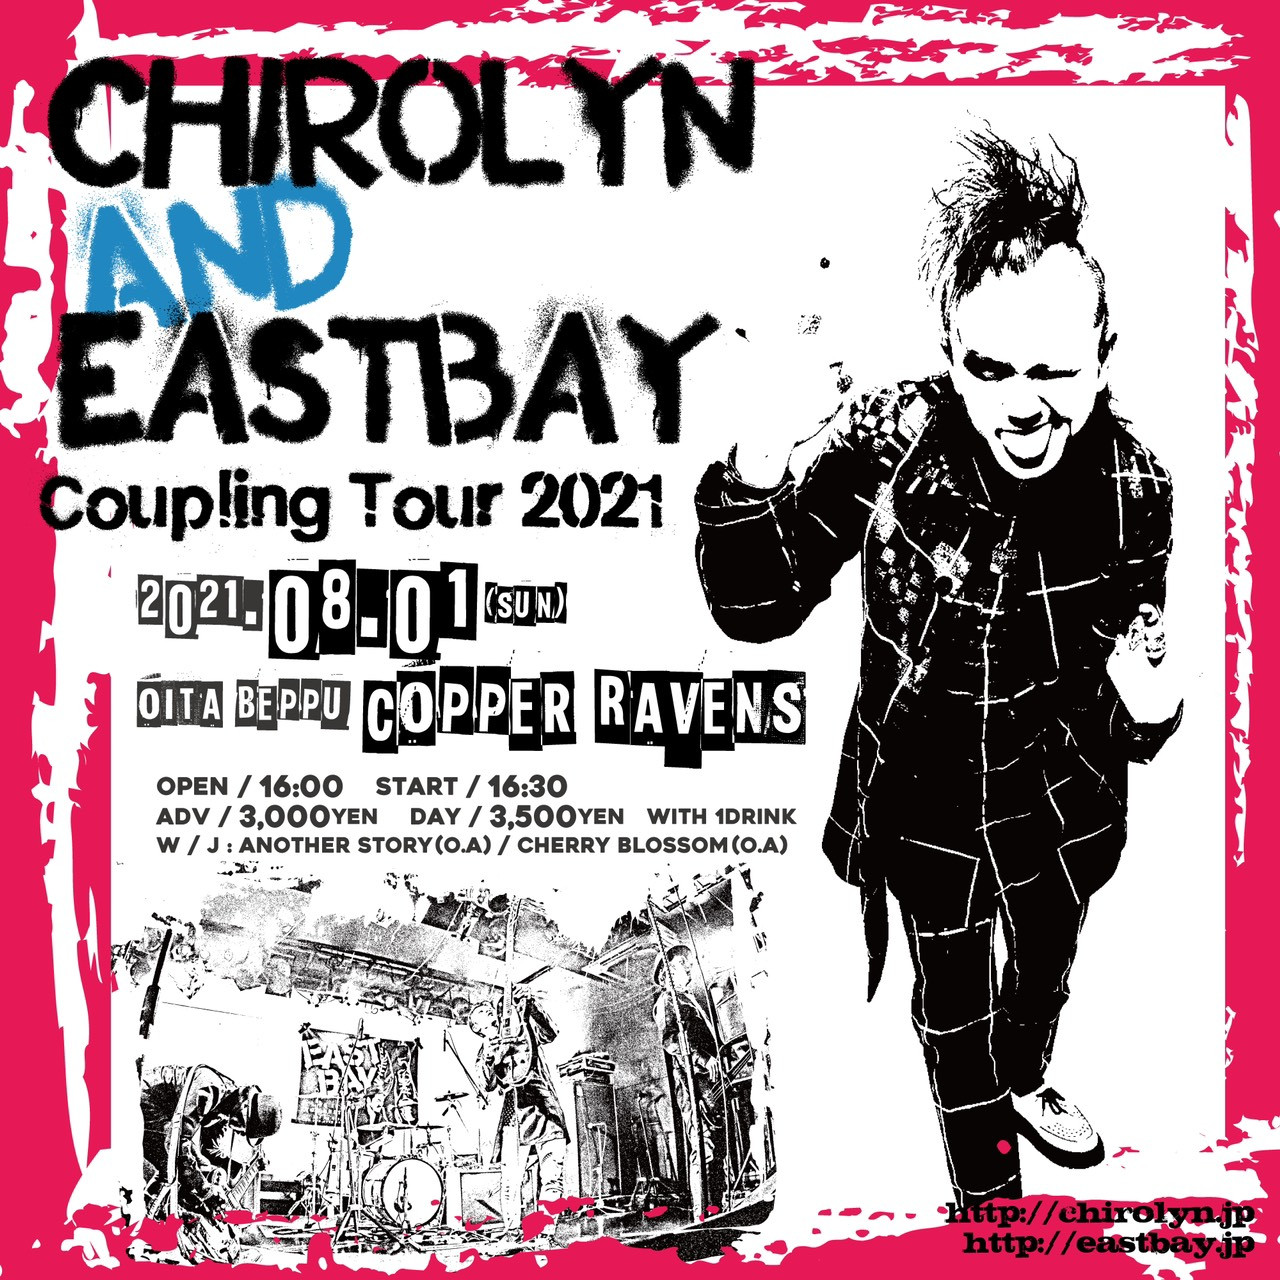 Chirolyn & EASTBAY Coupling Tour 2021 in 別府